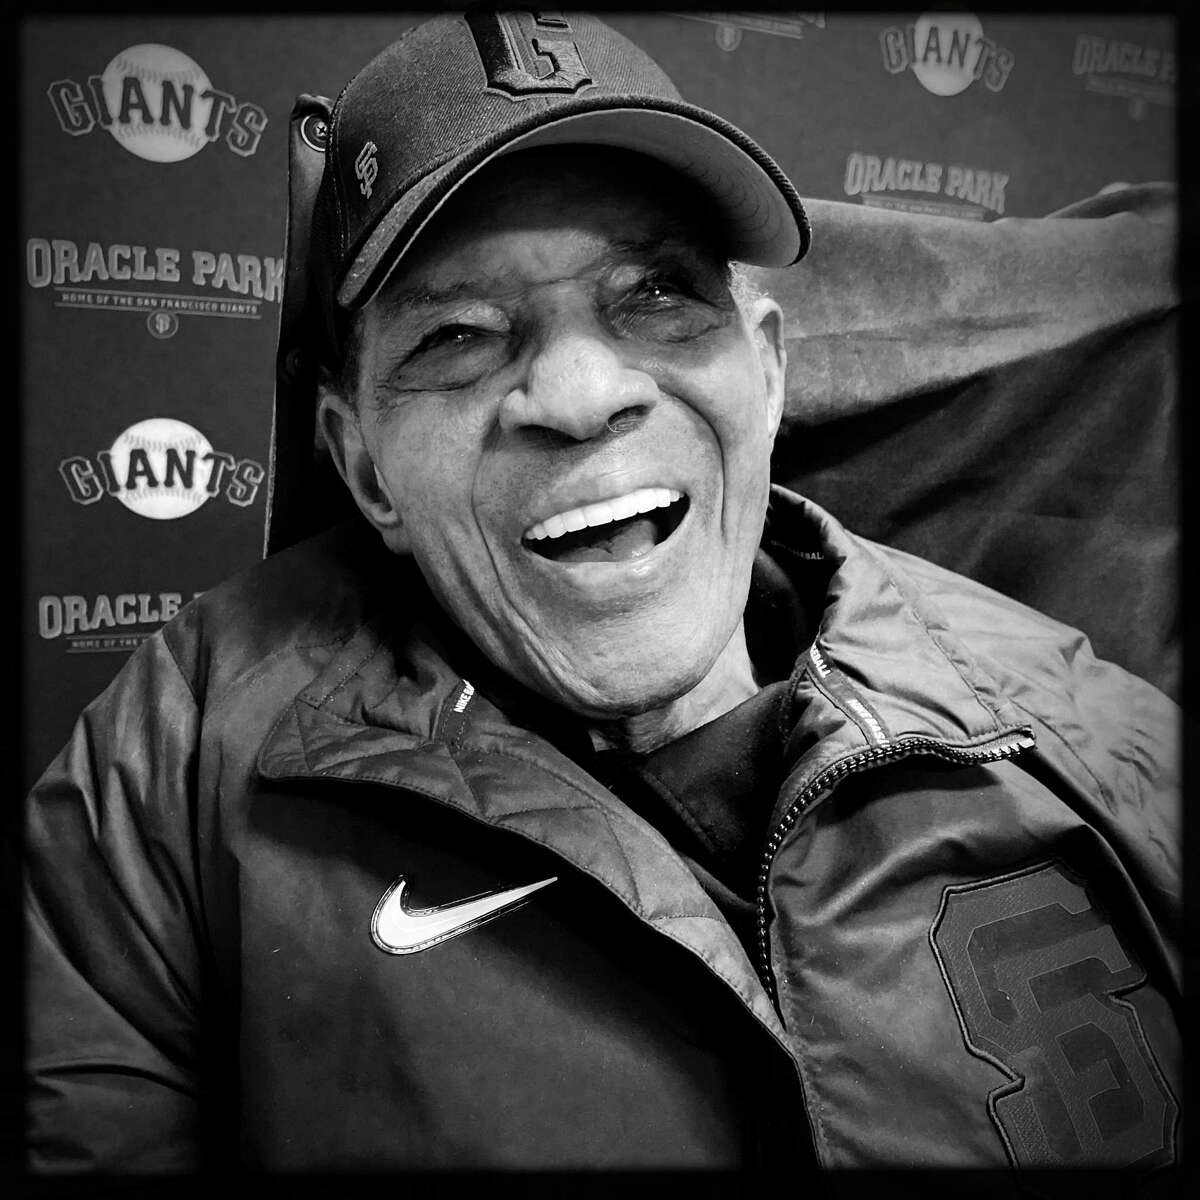 The story of baseball's forgotten Willie Mays, a pro player in SF — but  never for the Giants